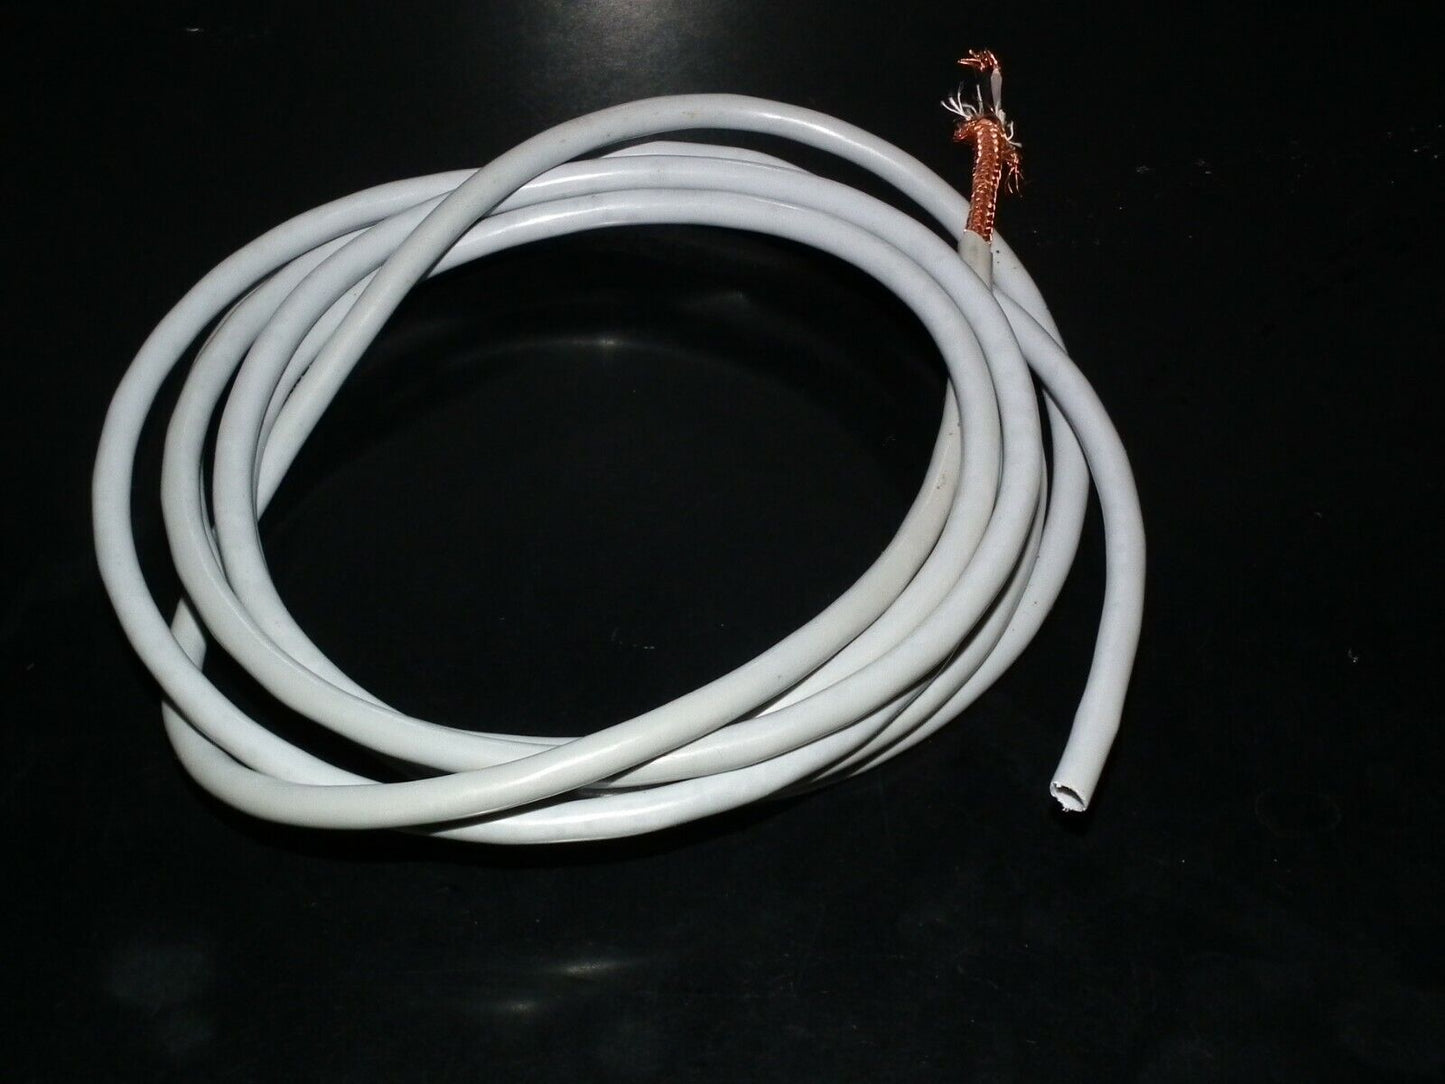 NOS Hi Quality 2-conductor Shielded Guitar Cable 9ft / 2.7m Heiru W. Germany 70s